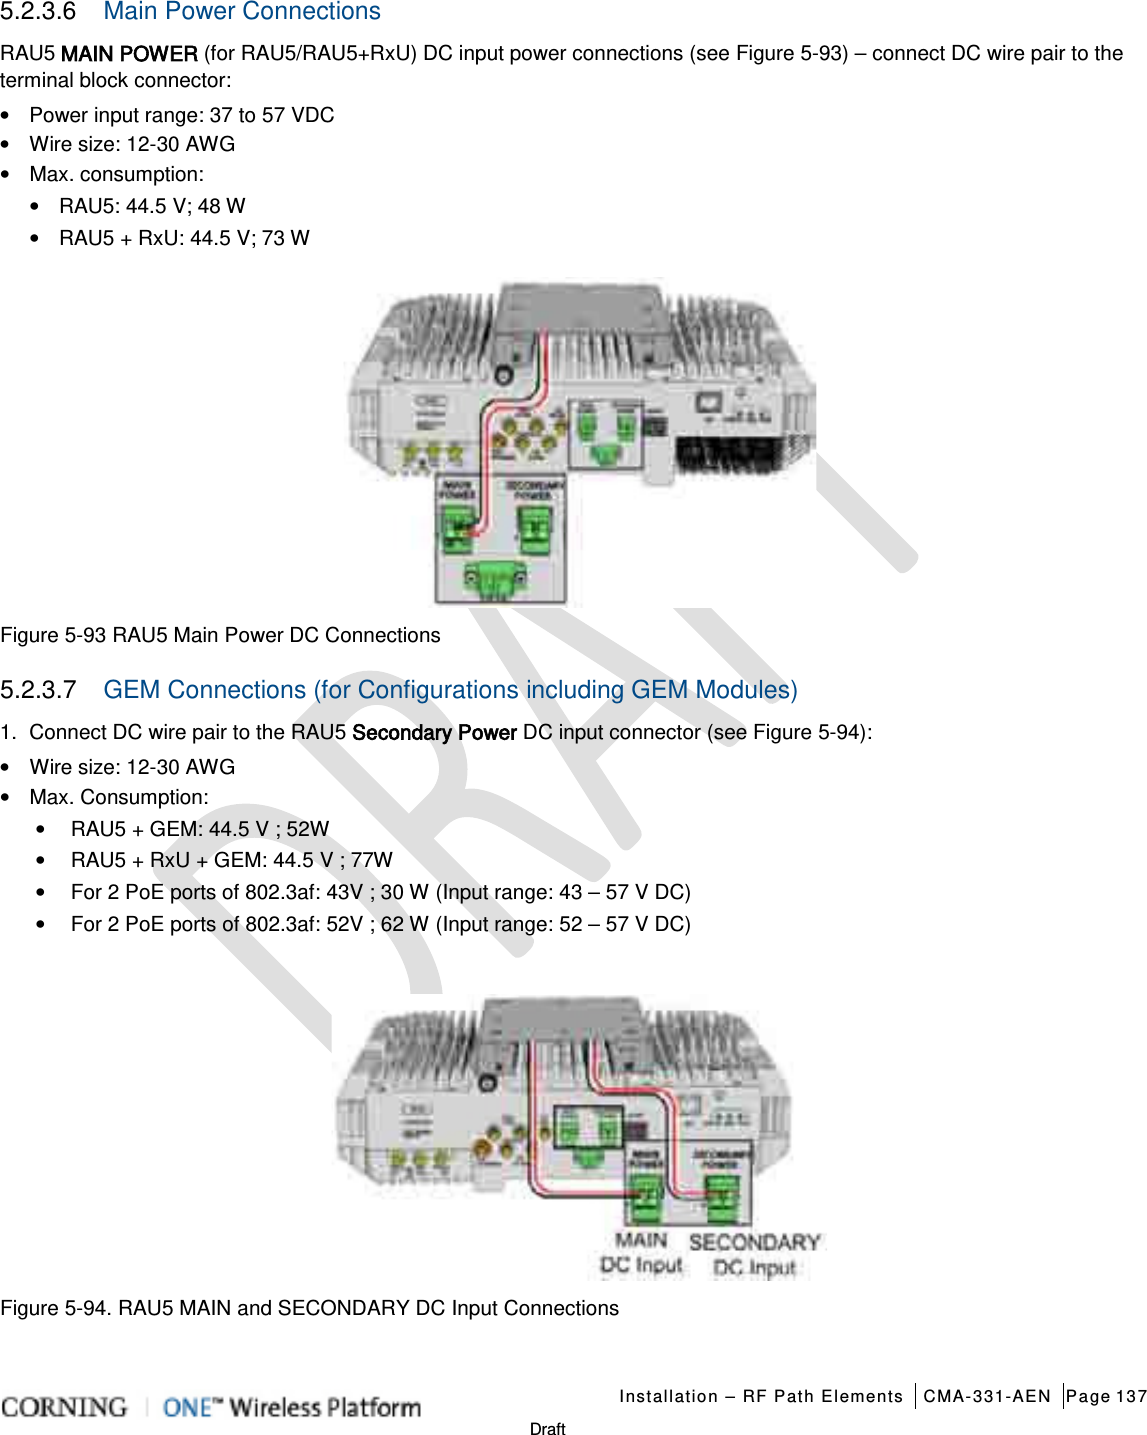   Installation – RF Path Elements CMA-331-AEN Page 137   Draft 5.2.3.6  Main Power Connections RAU5 MAIN POWER (for RAU5/RAU5+RxU) DC input power connections (see Figure  5-93) – connect DC wire pair to the terminal block connector: • Power input range: 37 to 57 VDC • Wire size: 12-30 AWG • Max. consumption: • RAU5: 44.5 V; 48 W • RAU5 + RxU: 44.5 V; 73 W  Figure  5-93 RAU5 Main Power DC Connections 5.2.3.7  GEM Connections (for Configurations including GEM Modules) 1.  Connect DC wire pair to the RAU5 Secondary Power DC input connector (see Figure  5-94): • Wire size: 12-30 AWG • Max. Consumption: • RAU5 + GEM: 44.5 V ; 52W • RAU5 + RxU + GEM: 44.5 V ; 77W • For 2 PoE ports of 802.3af: 43V ; 30 W (Input range: 43 – 57 V DC) • For 2 PoE ports of 802.3af: 52V ; 62 W (Input range: 52 – 57 V DC)   Figure  5-94. RAU5 MAIN and SECONDARY DC Input Connections  